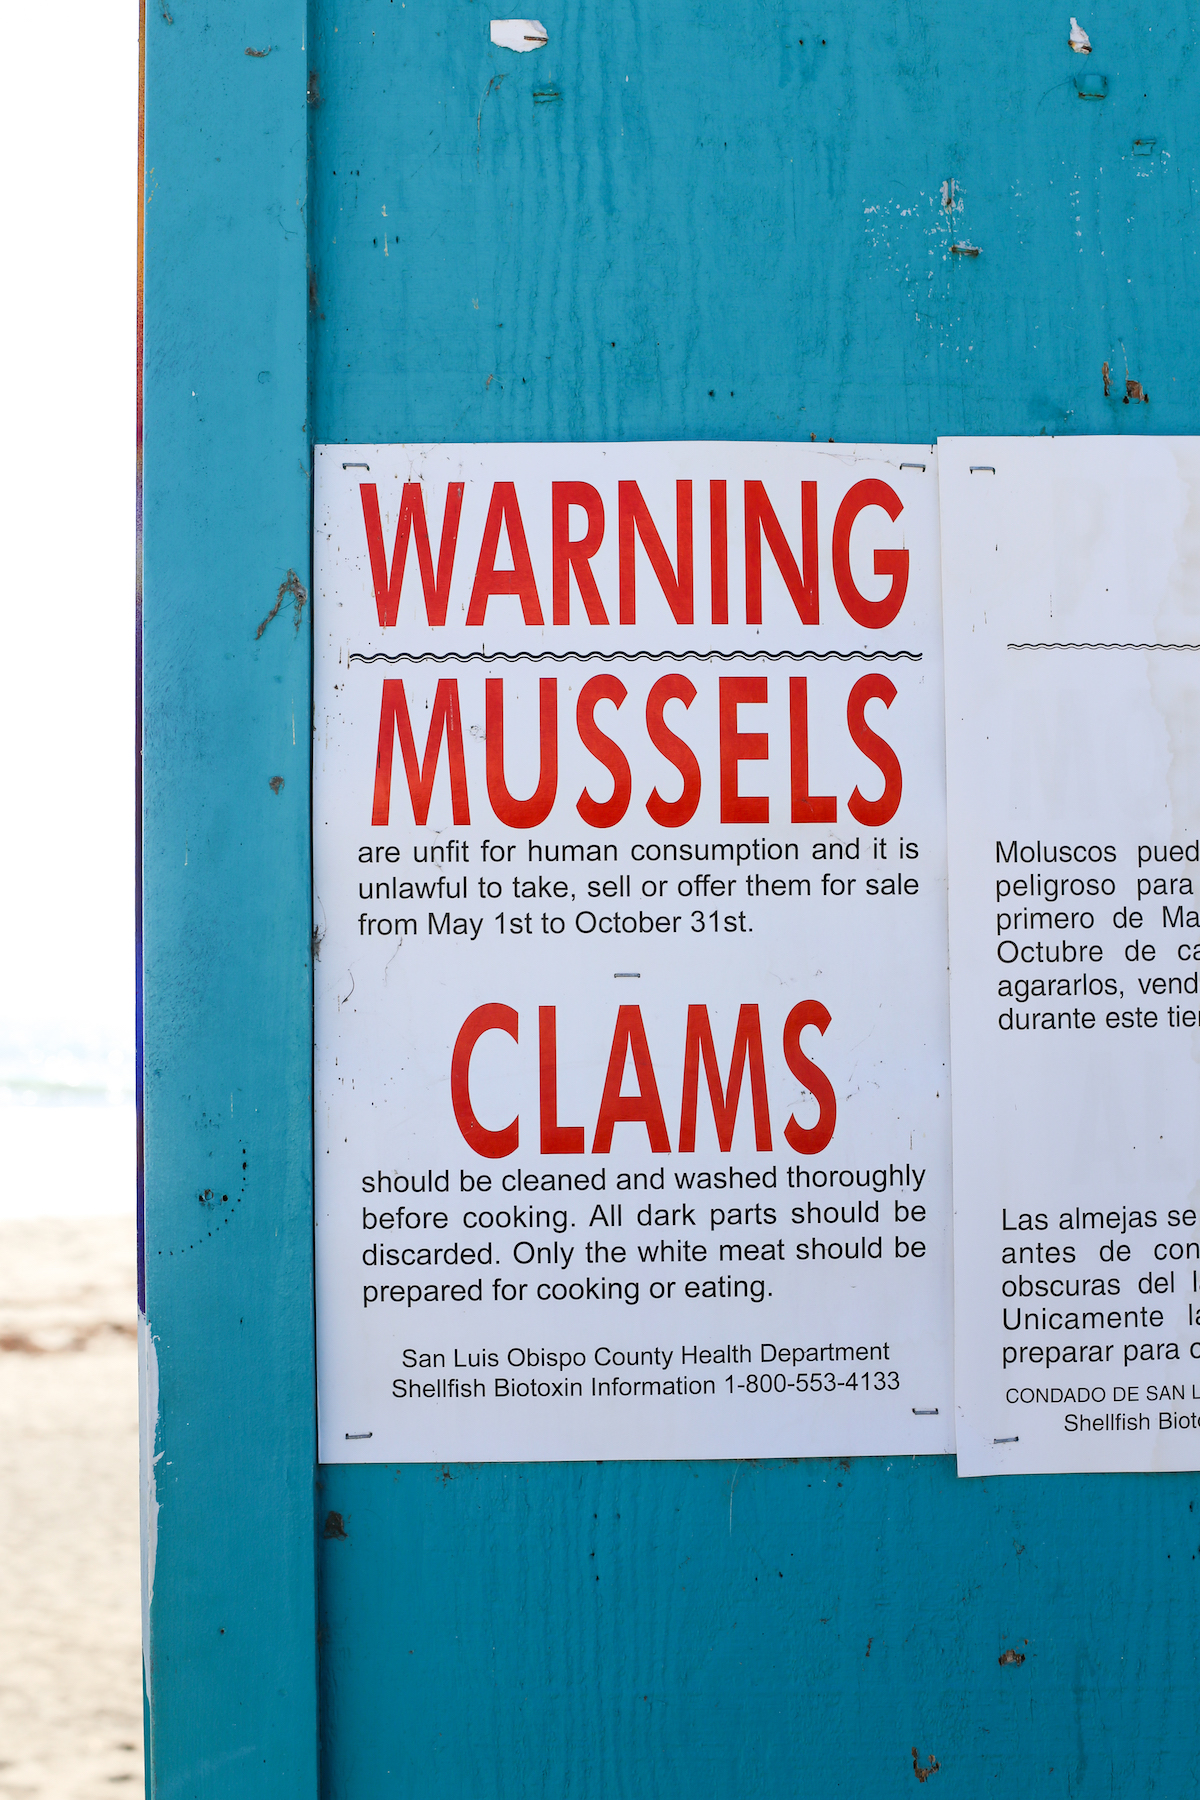 Sign posted on blue building reads "Warning: Mussels are unfit for human consumption and it is unlawful to take, sell, or offer them for sale from May 1st to October 31st. Clams should be cleaned and washed thoroughly before cooking. All dark parts should be discarded. Only the white meat should be prepared for cooking or eating. 
San Luis Obispo County Health Department Shellfish Biotoxin Information 1-800-553-4133